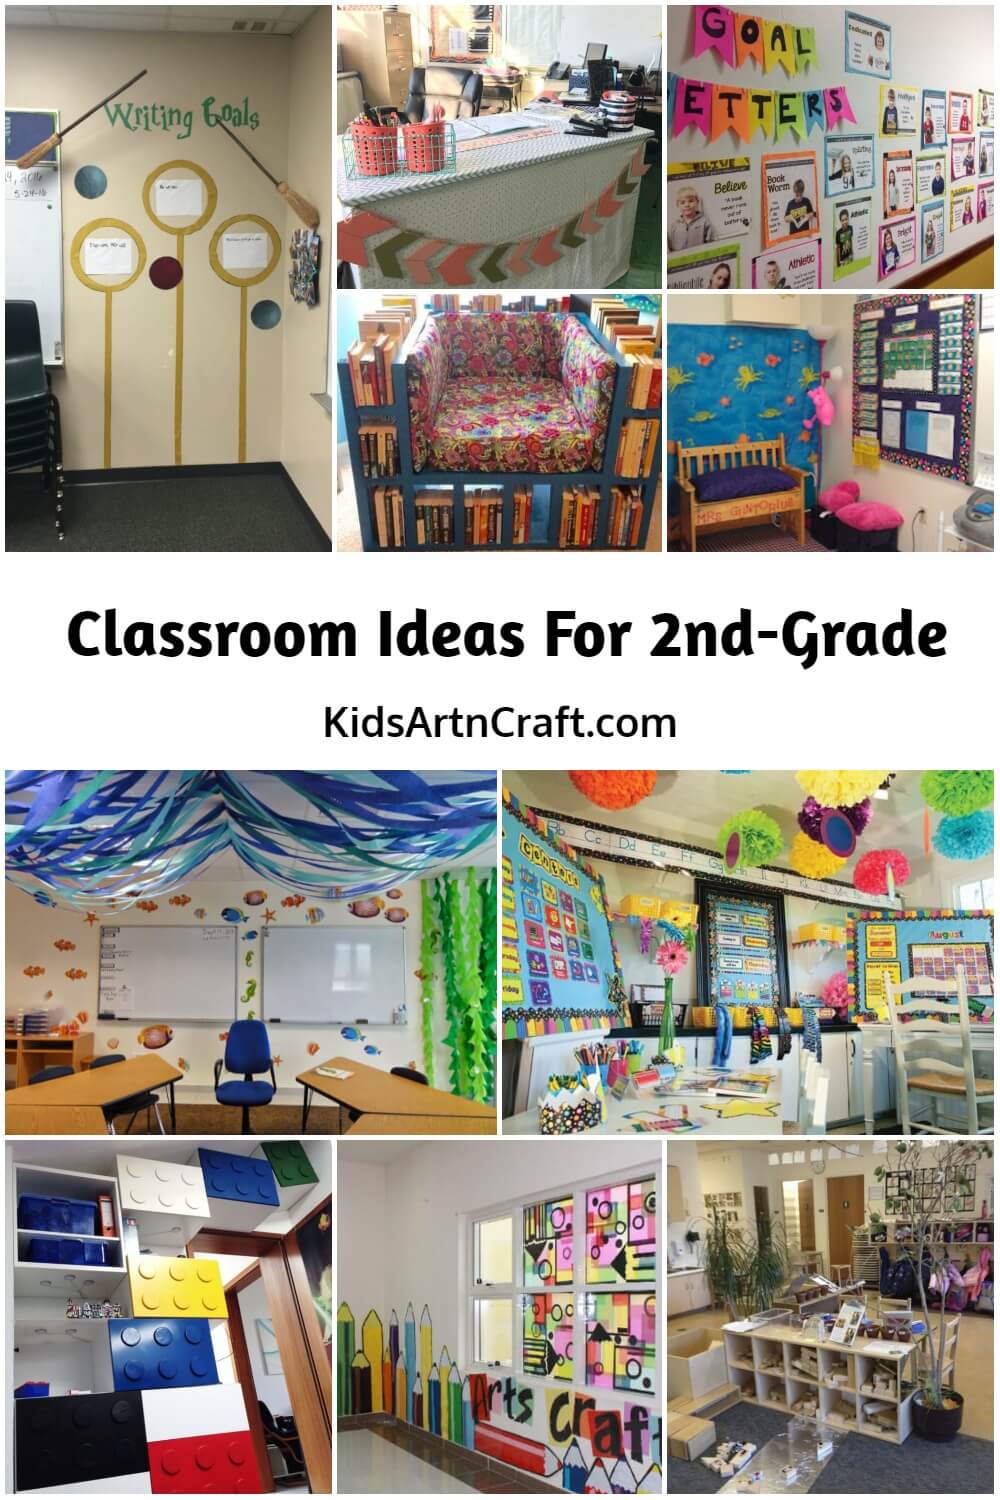 Classrooms ideas for 2nd grade